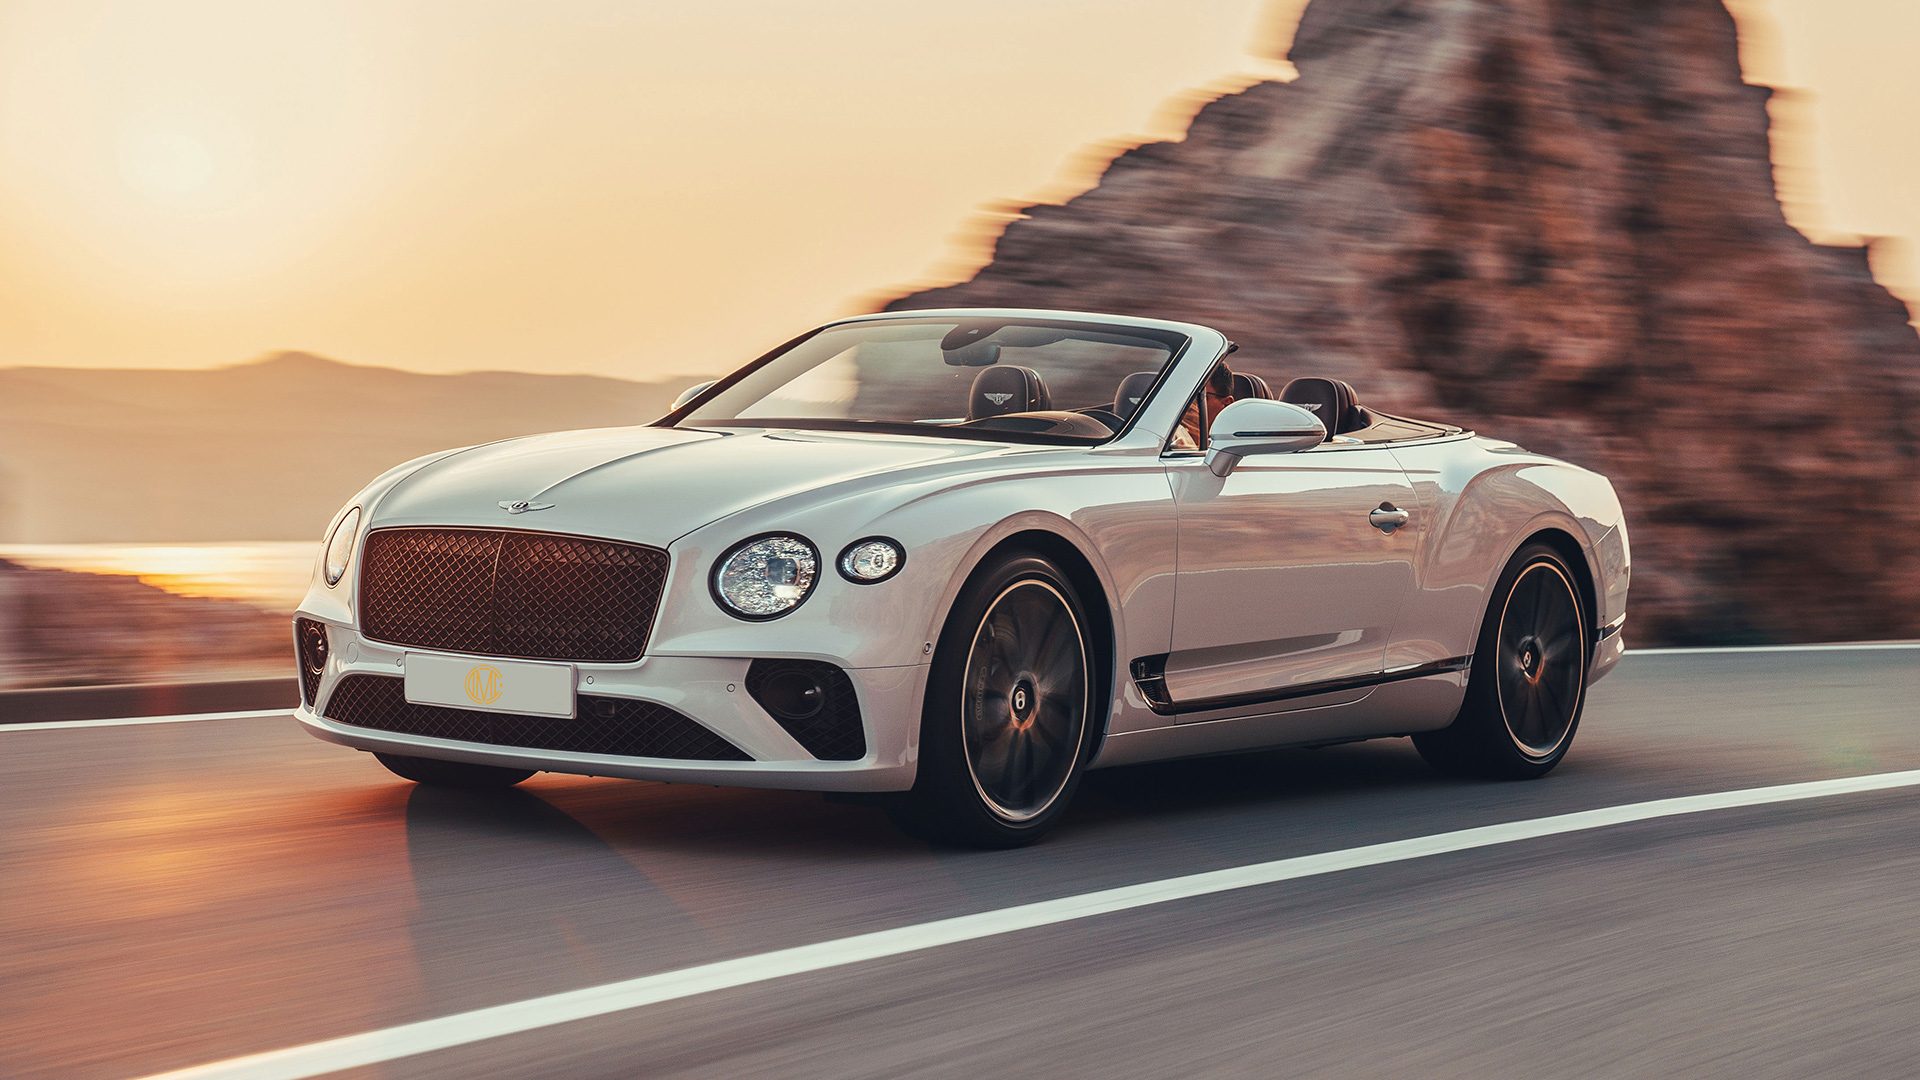 WHY RENT A BENTLEY CONTINENTAL GTC IN MONACO?